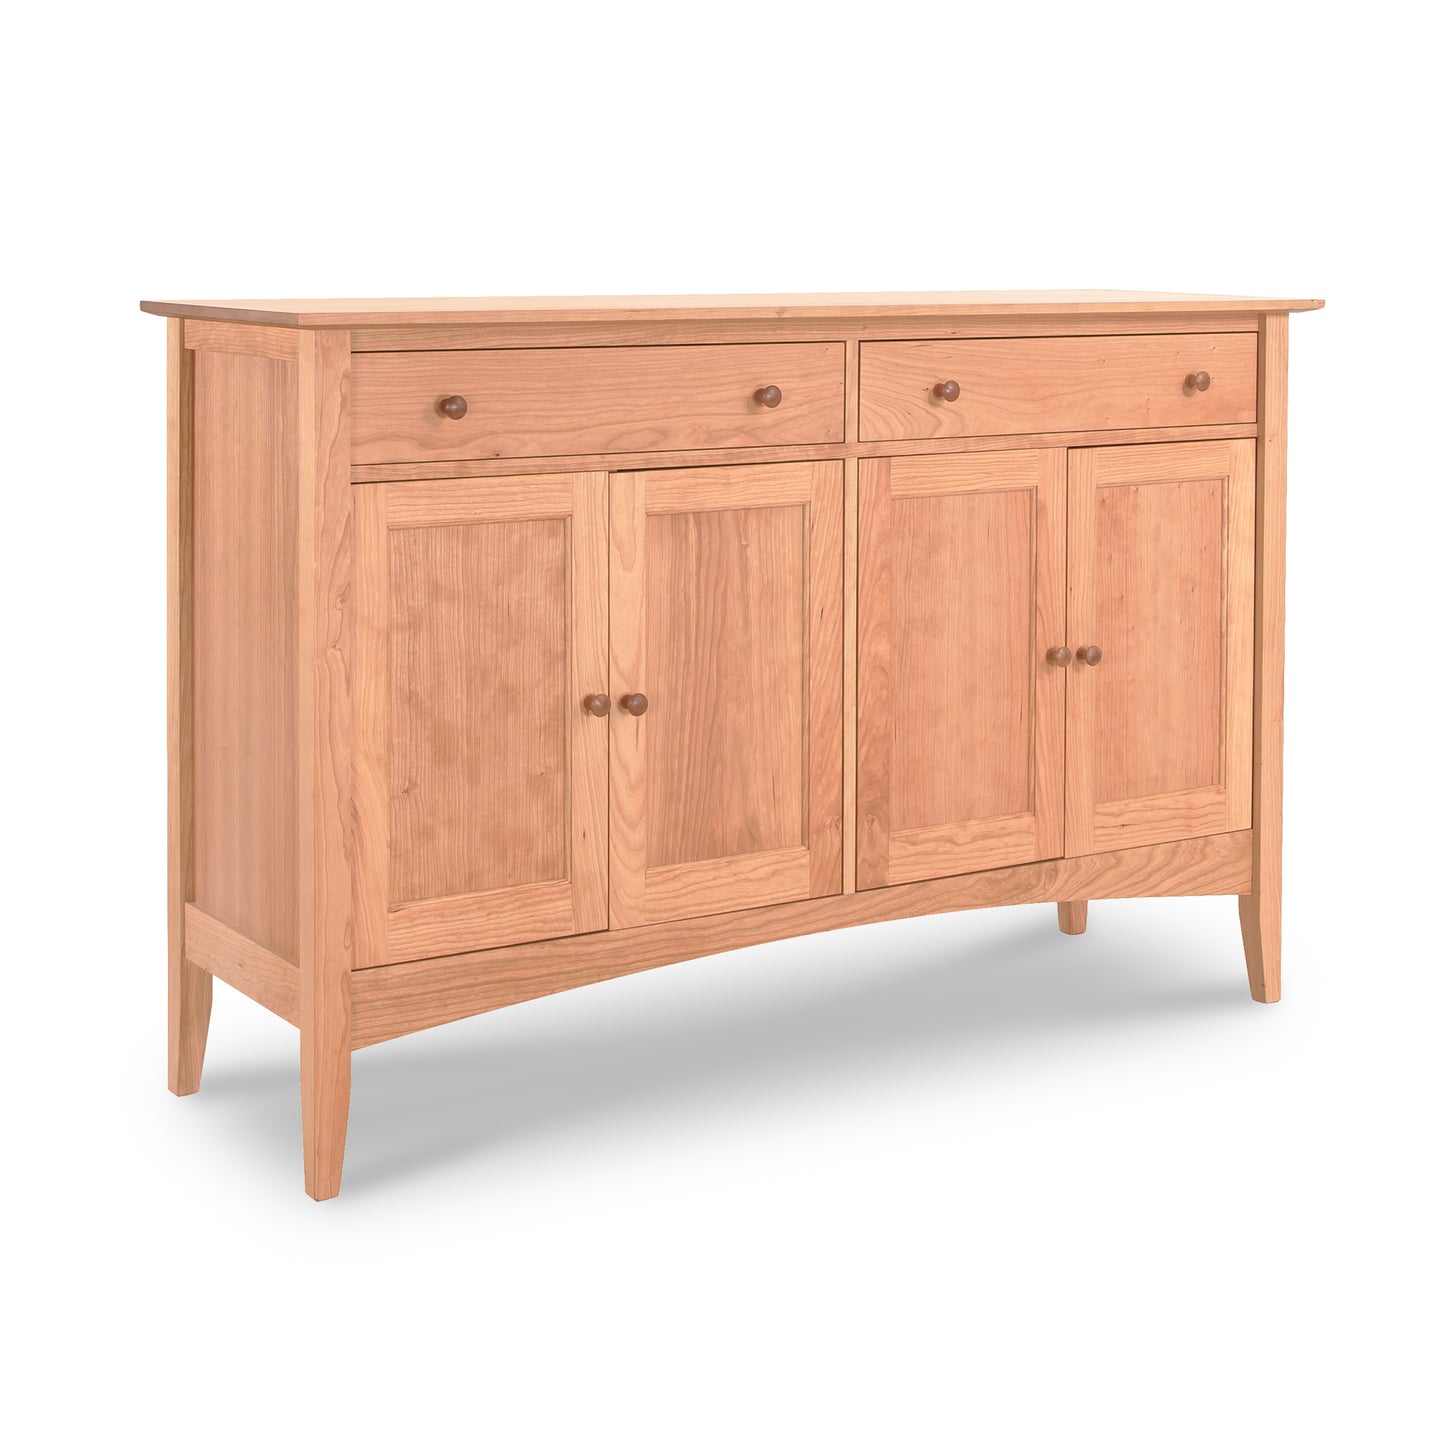 A large Maple Corner Woodworks American Shaker sideboard with three drawers and three doors on a white background, showcasing Vermont craftsmanship through its solid hardwood construction.